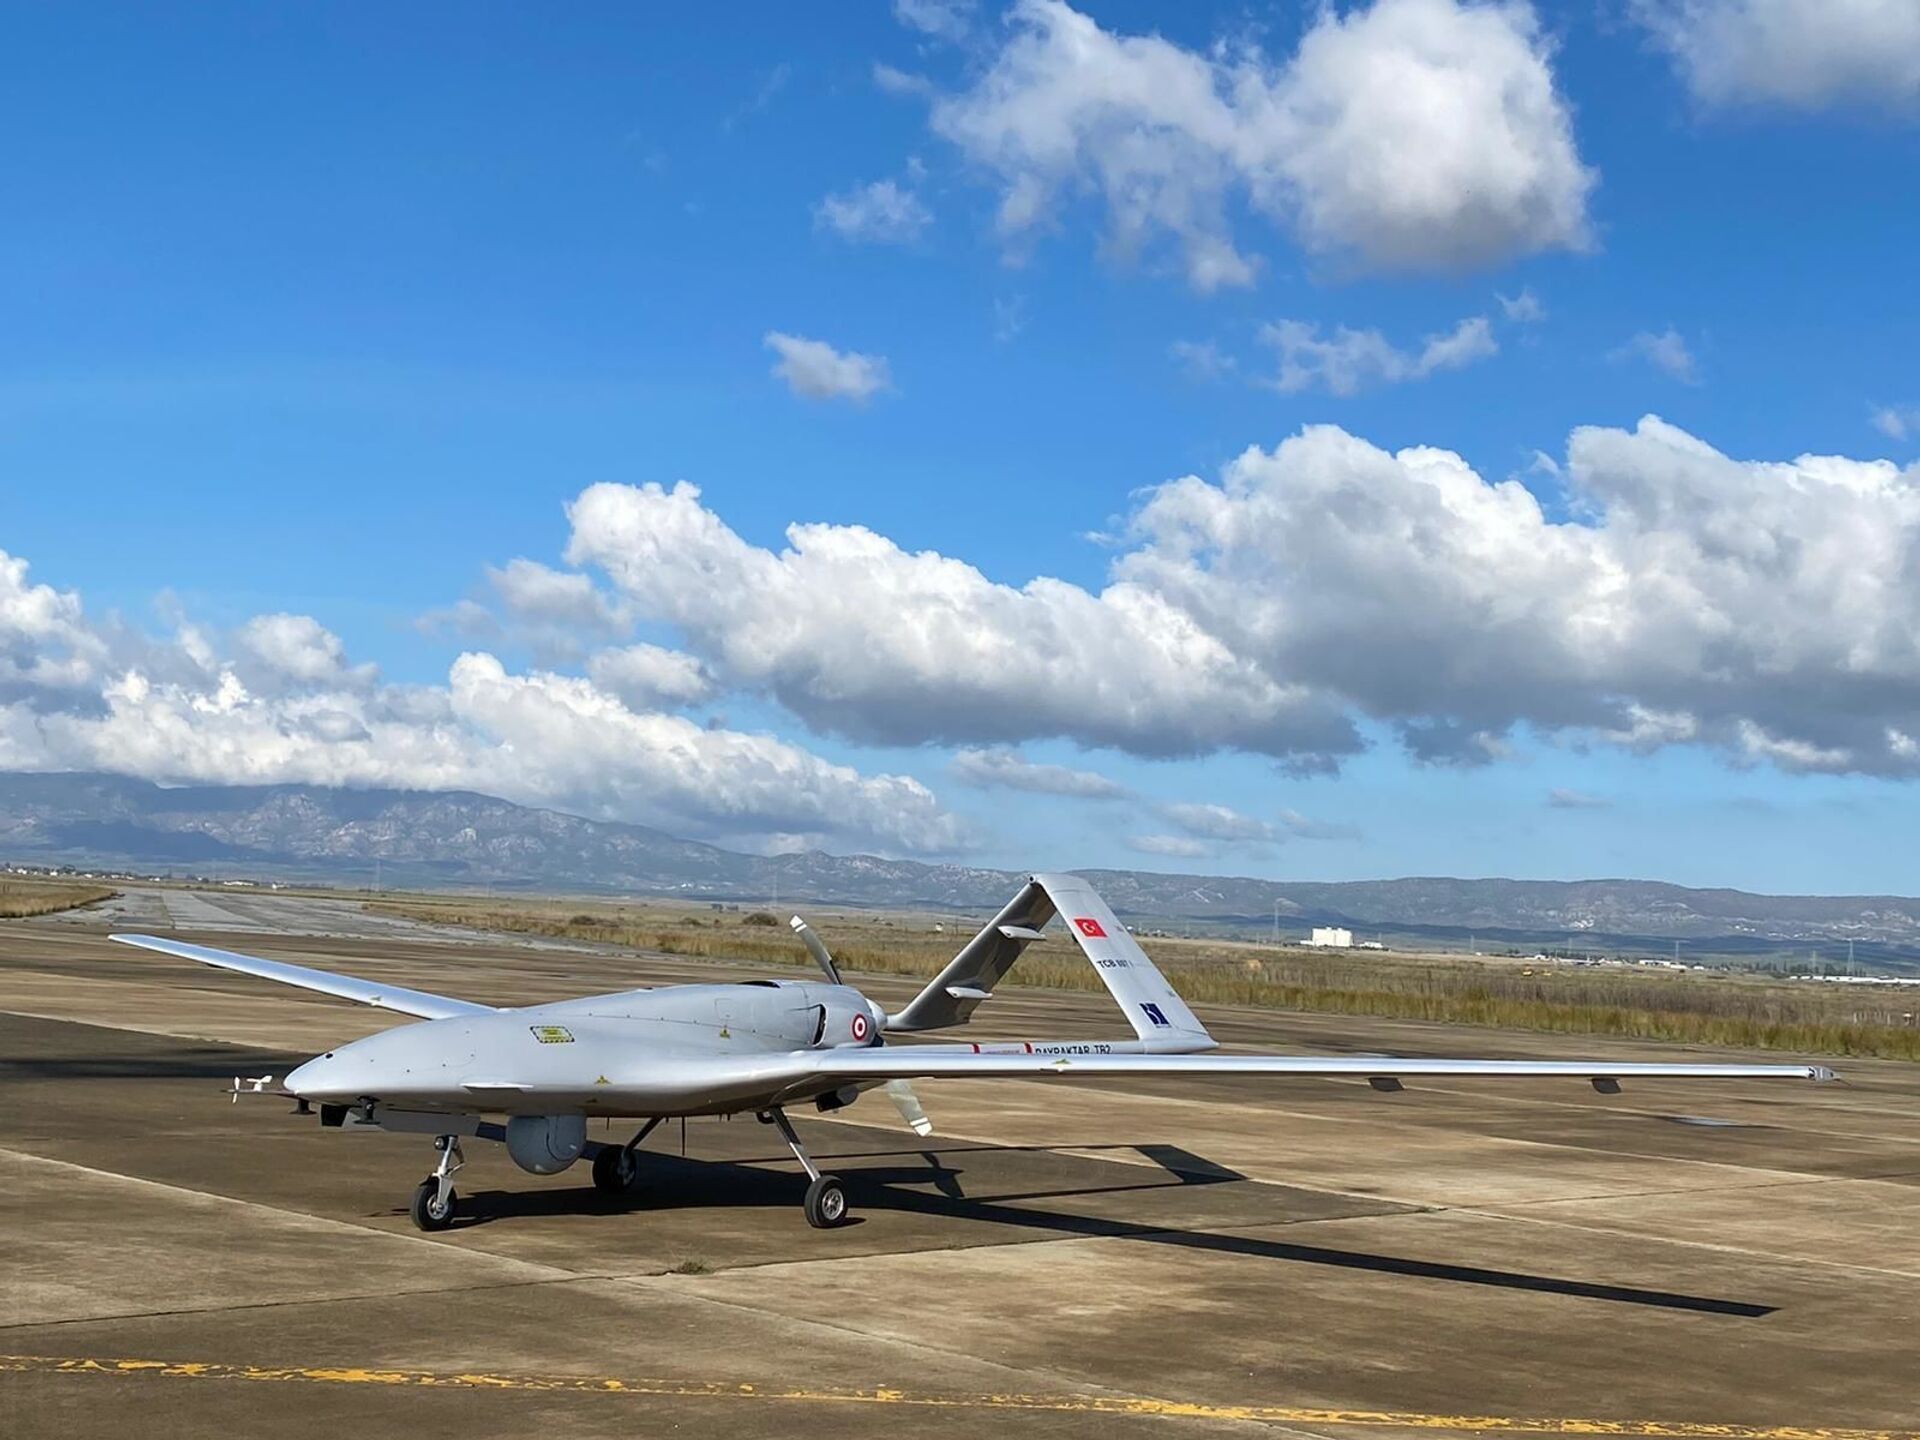 A Turkish-made Bayraktar TB2 drone is seen shortly after its landing at an airport in Gecitkala, known as Lefkoniko in Greek, in Cyprus, Monday, Dec. 16, 2019 - Sputnik International, 1920, 13.11.2021